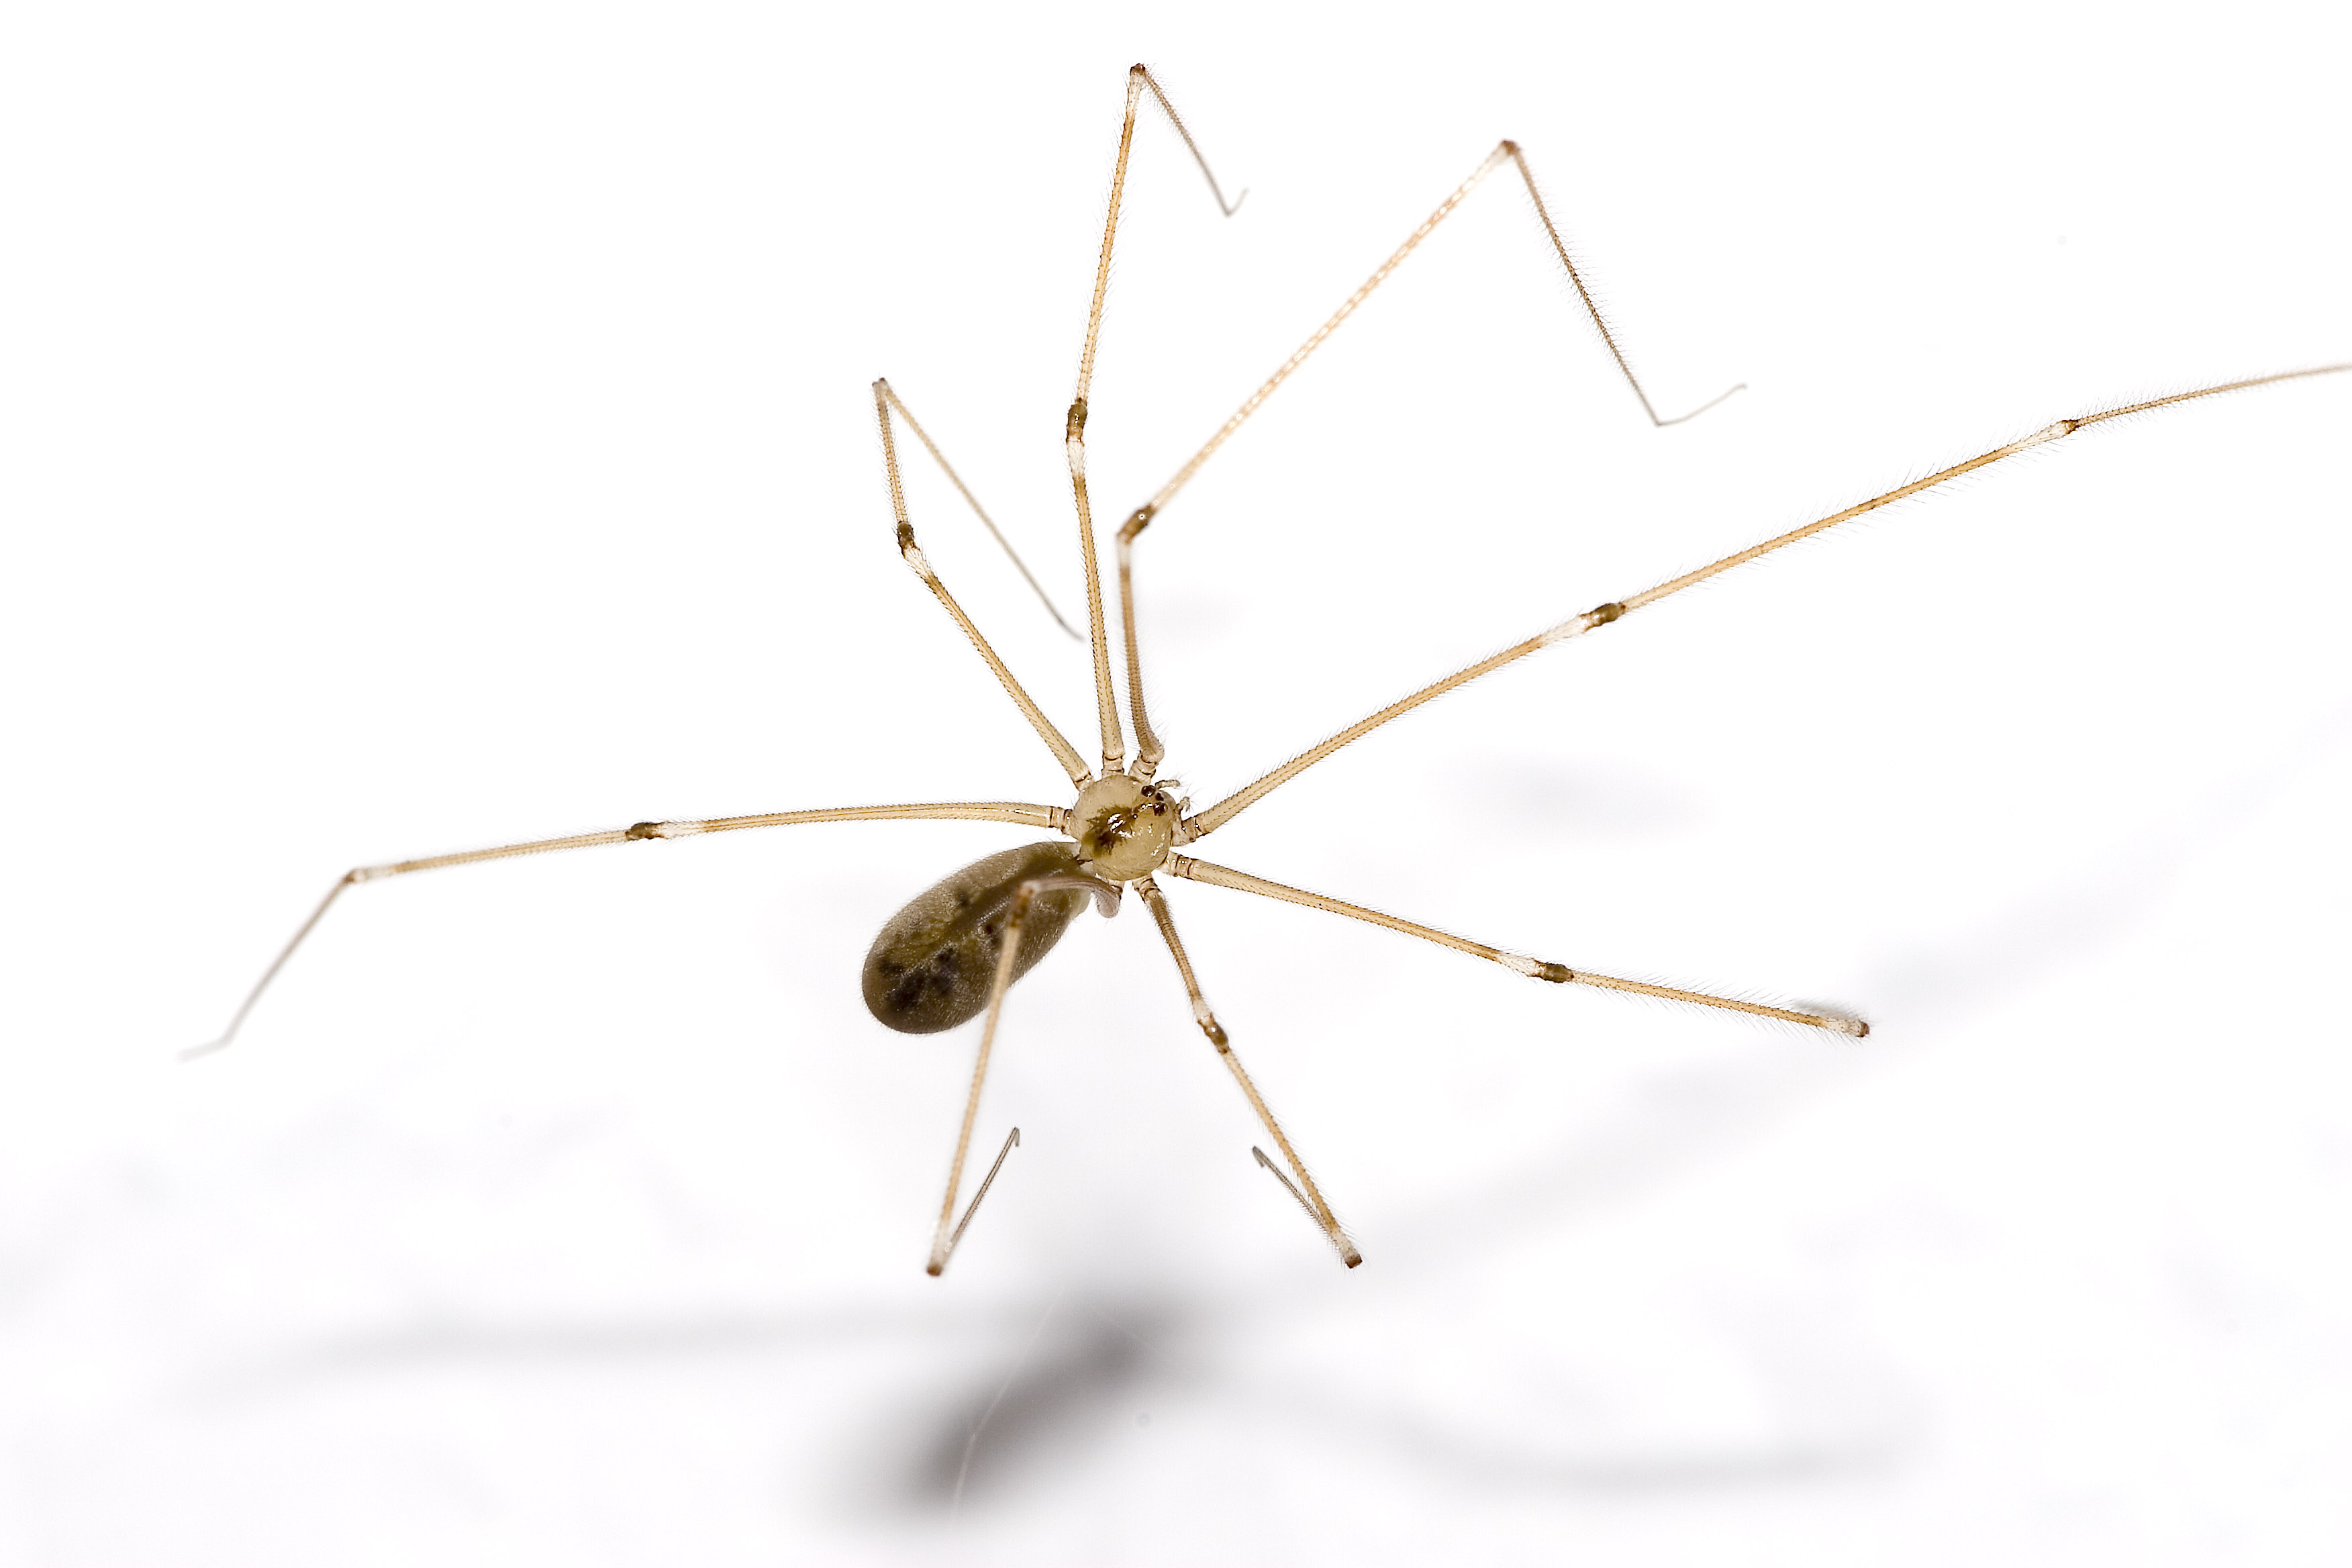 Is daddy long legs poisonous?